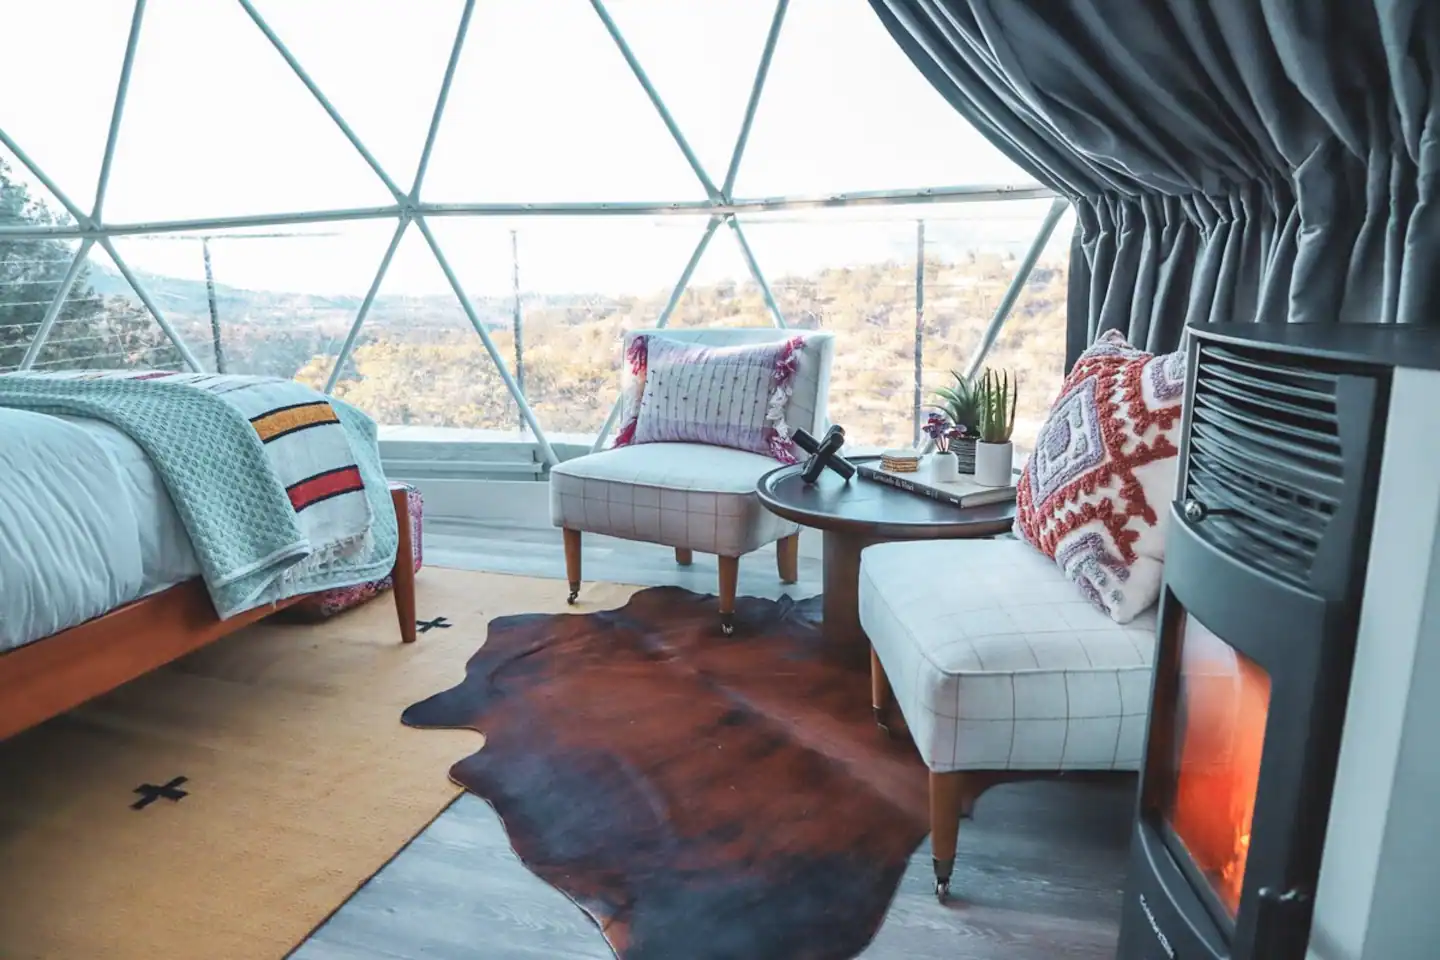 Zia Geo dome counts with one queen bed that sleeps a maximum of two people.